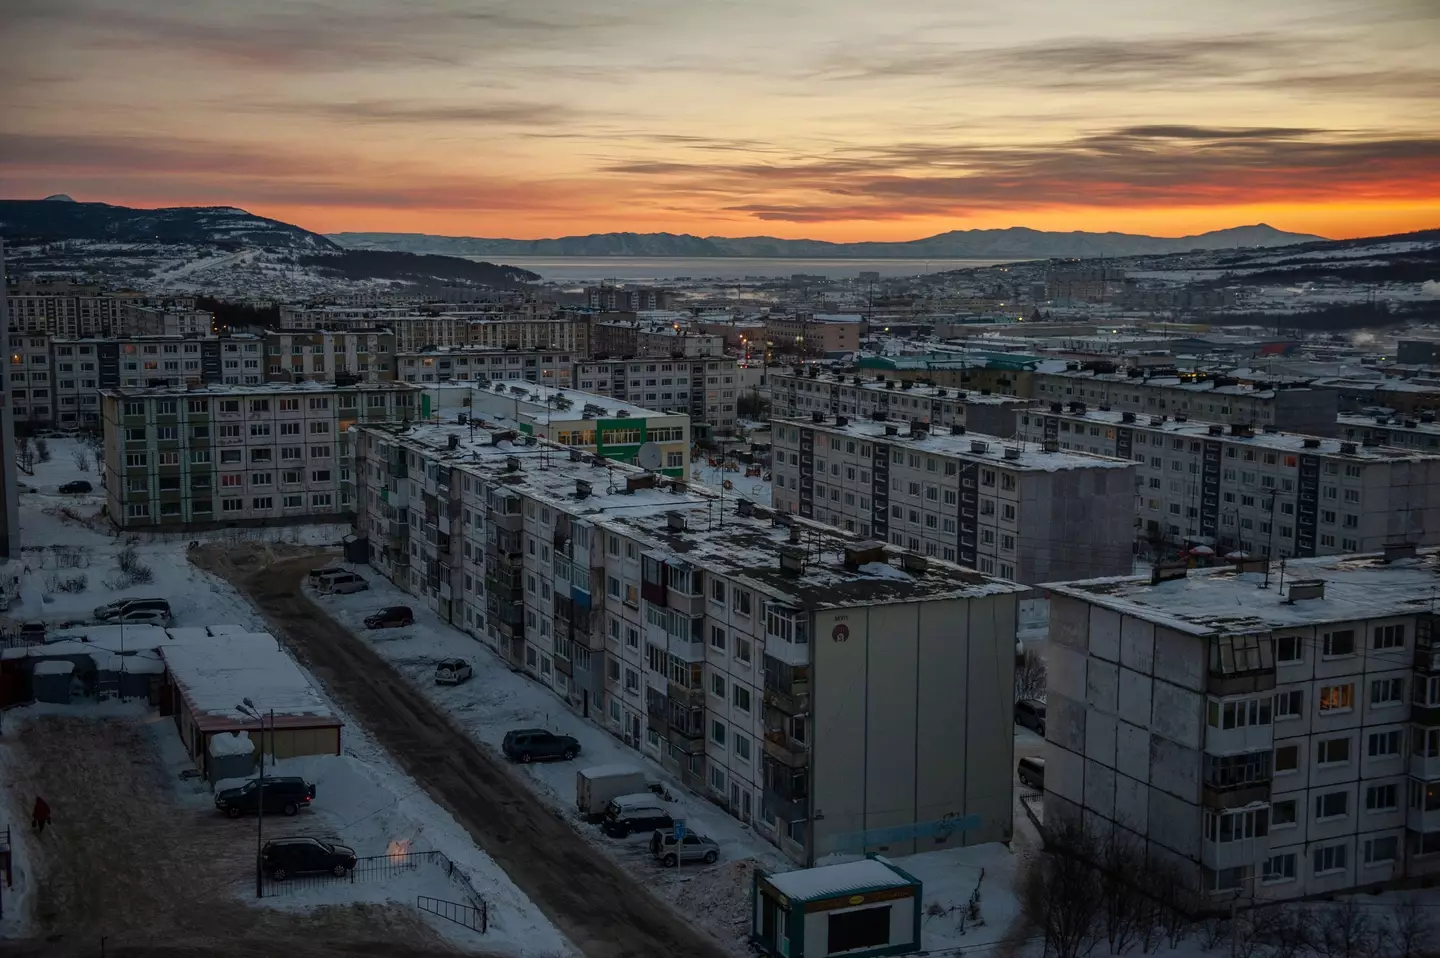 Imagine walking for a year of your life to end up here in Magadan.